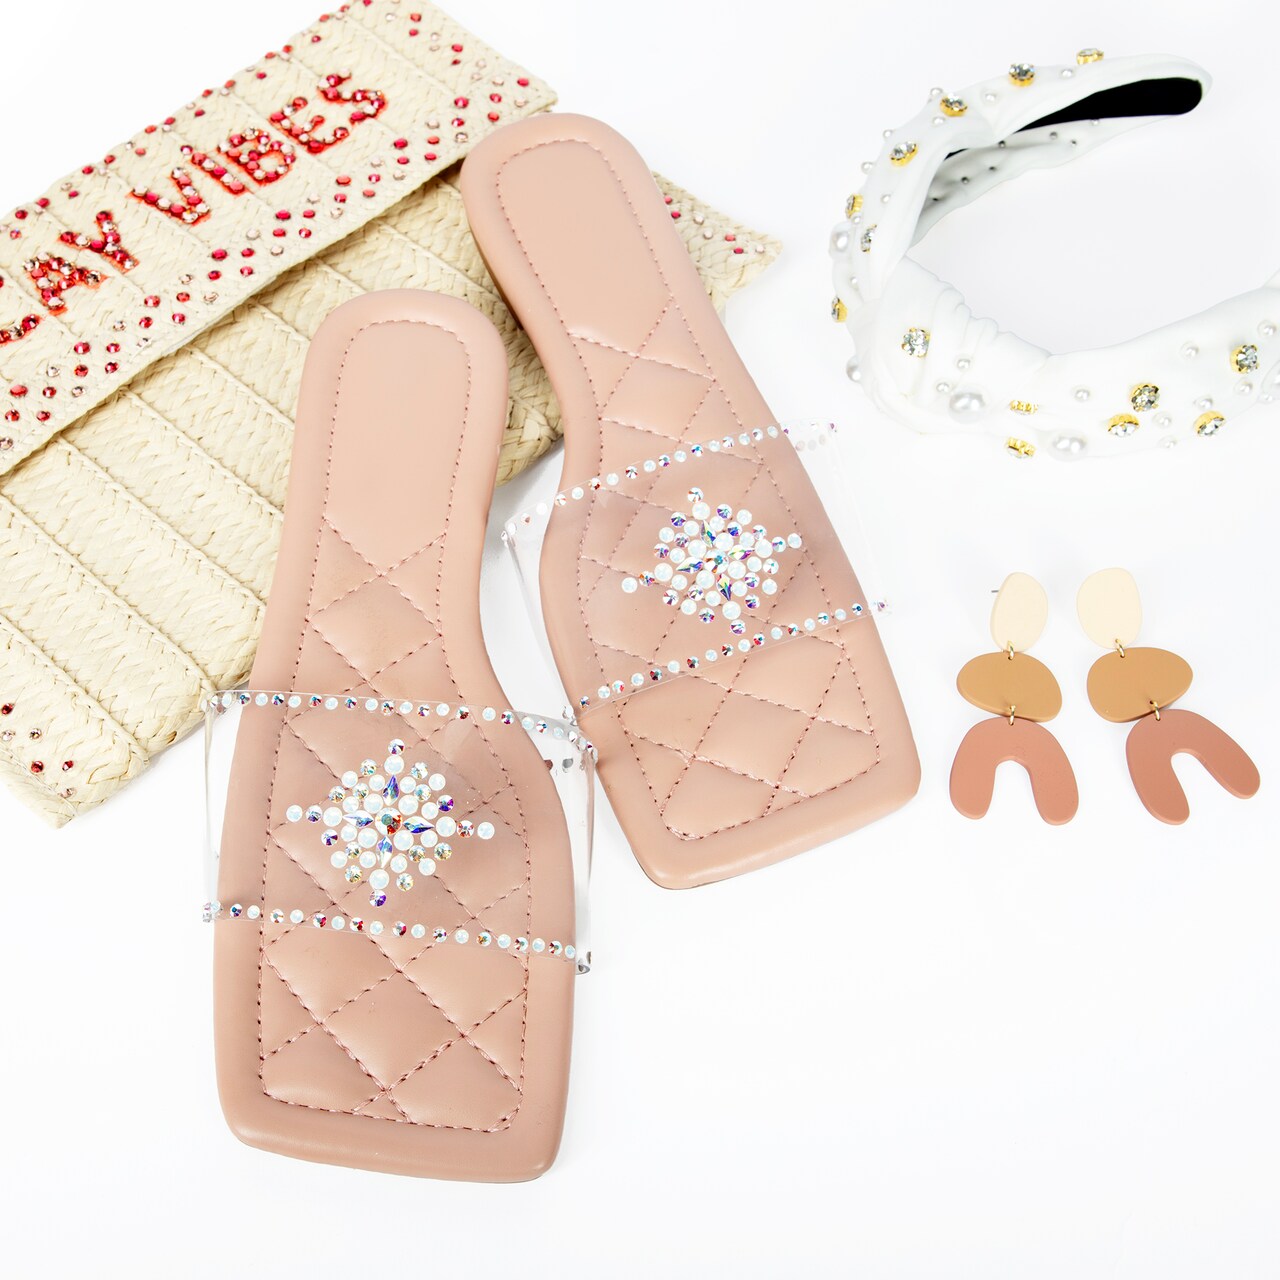 Crystalized Sandals with Crystal Radiance Austrian Crystals